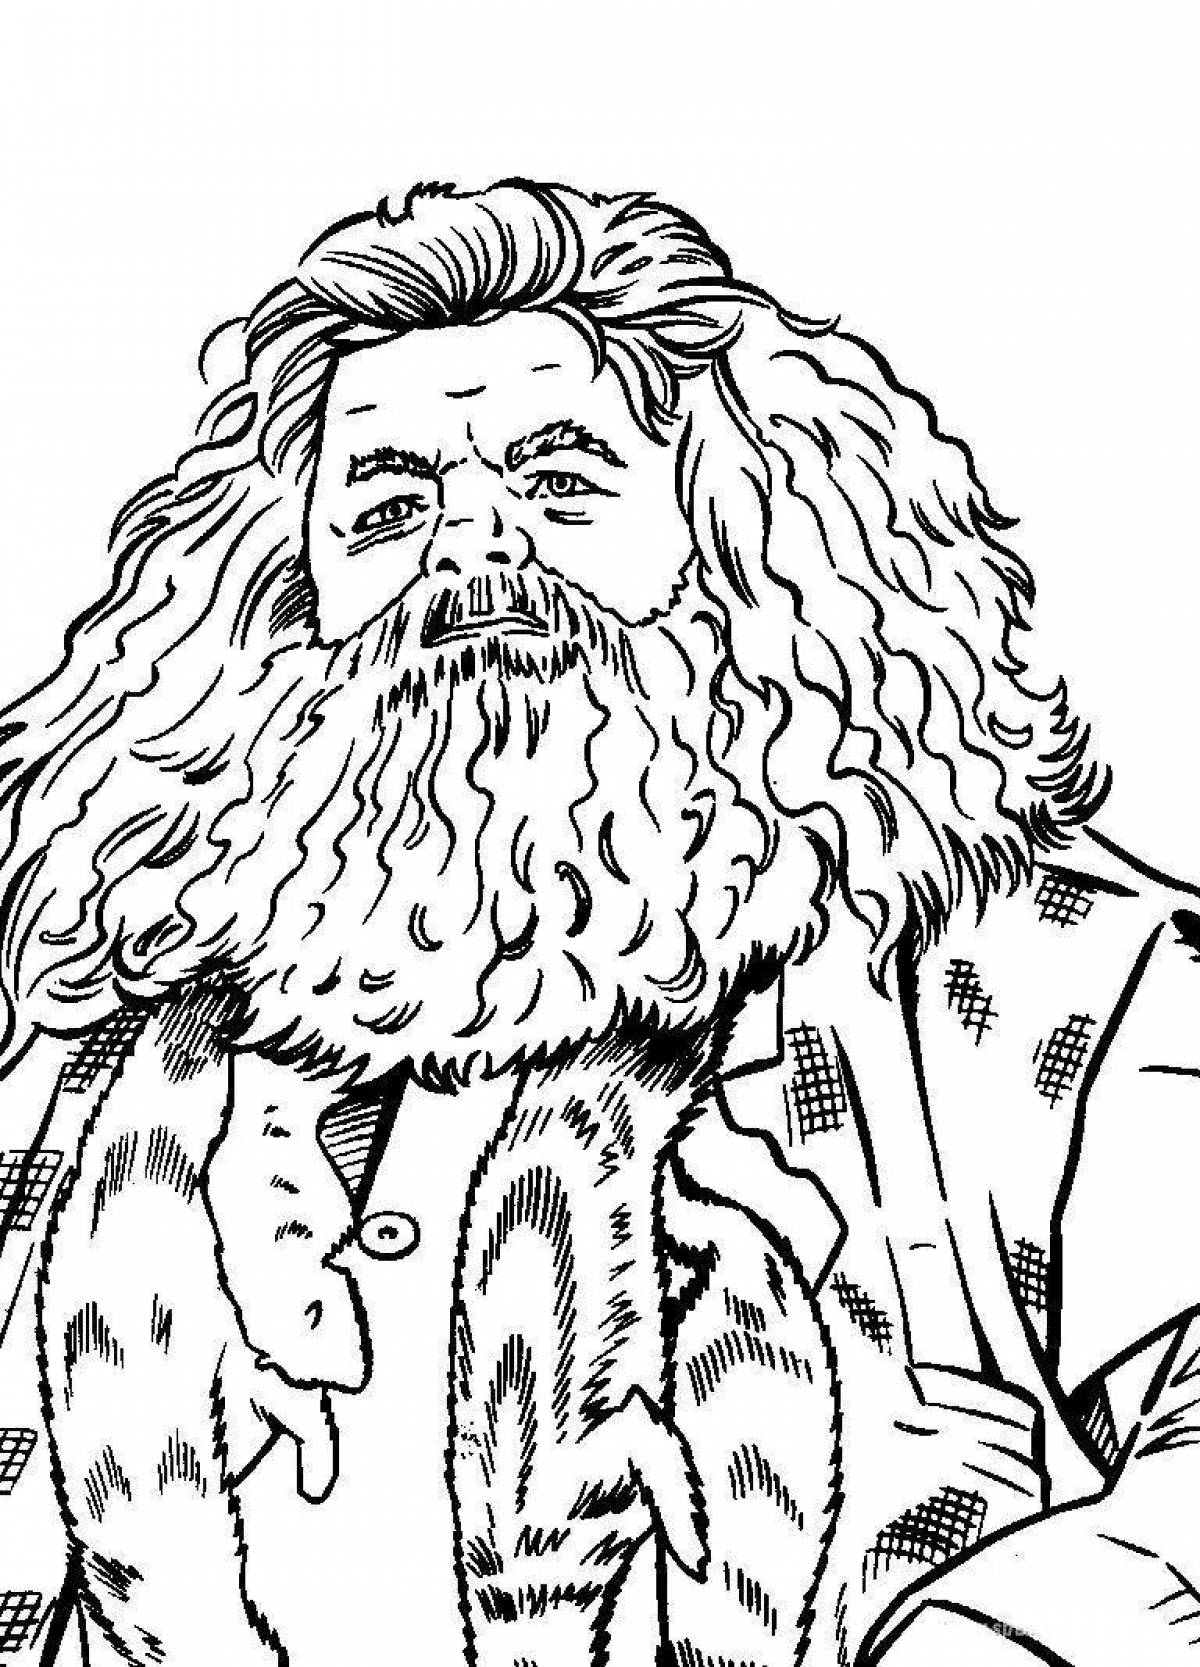 Exalted Dumbledore coloring page